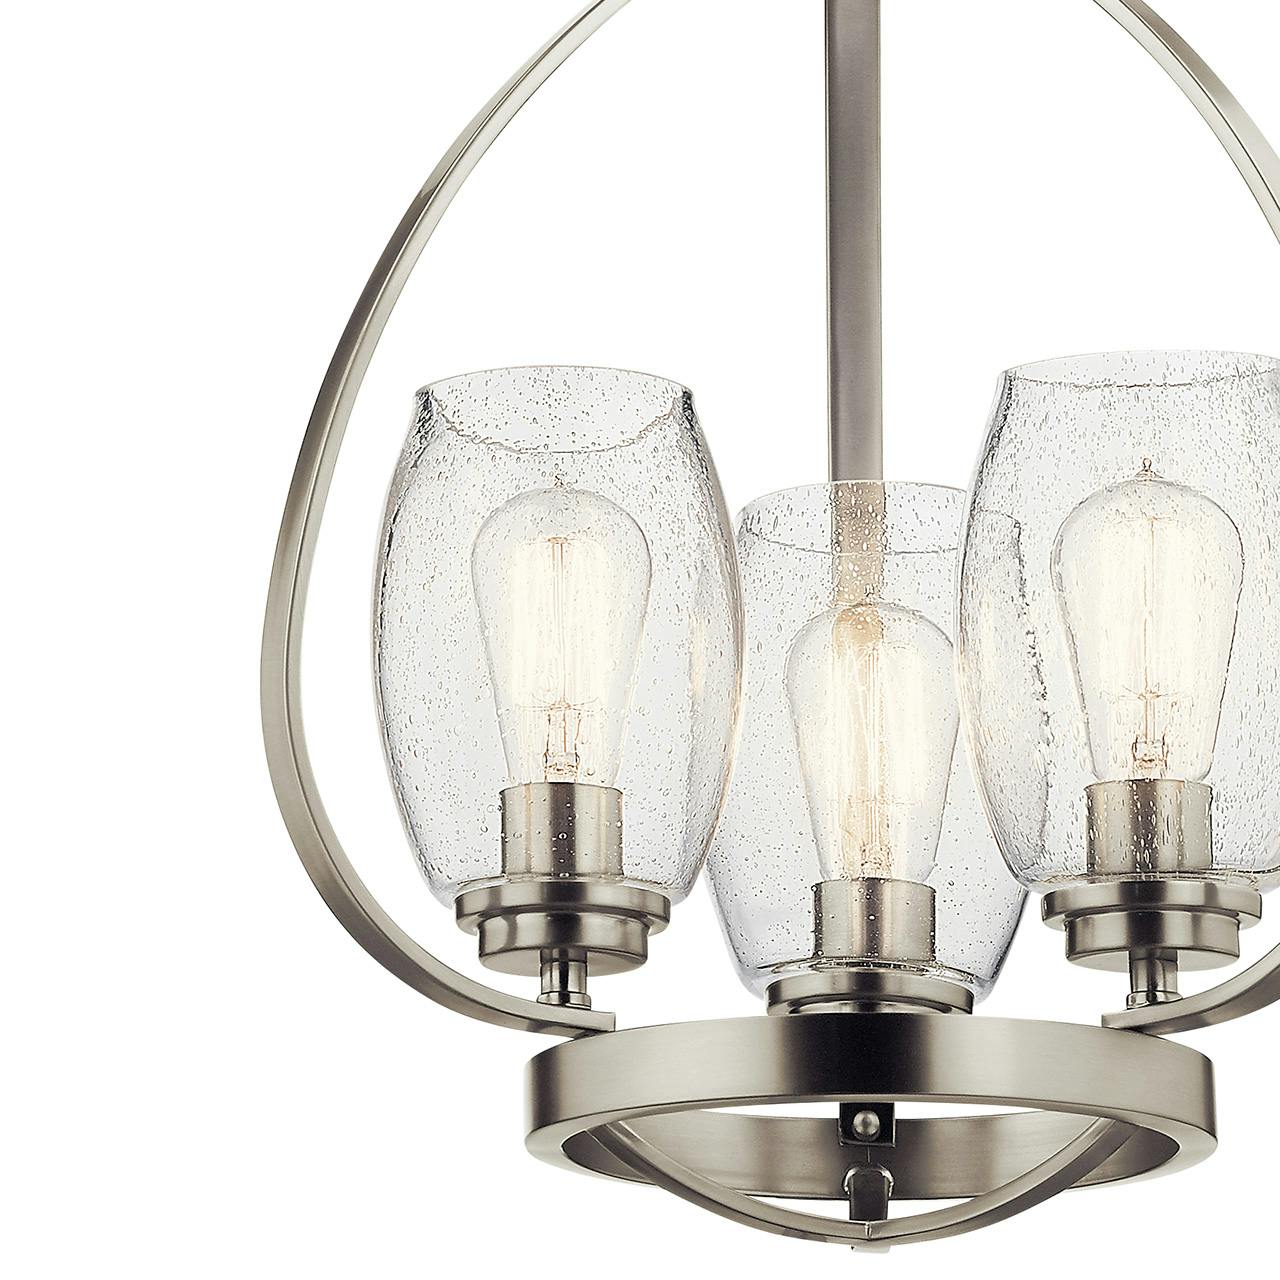 Close up view of the Tuscany 3 Light Mini Chandelier Nickel on a white background